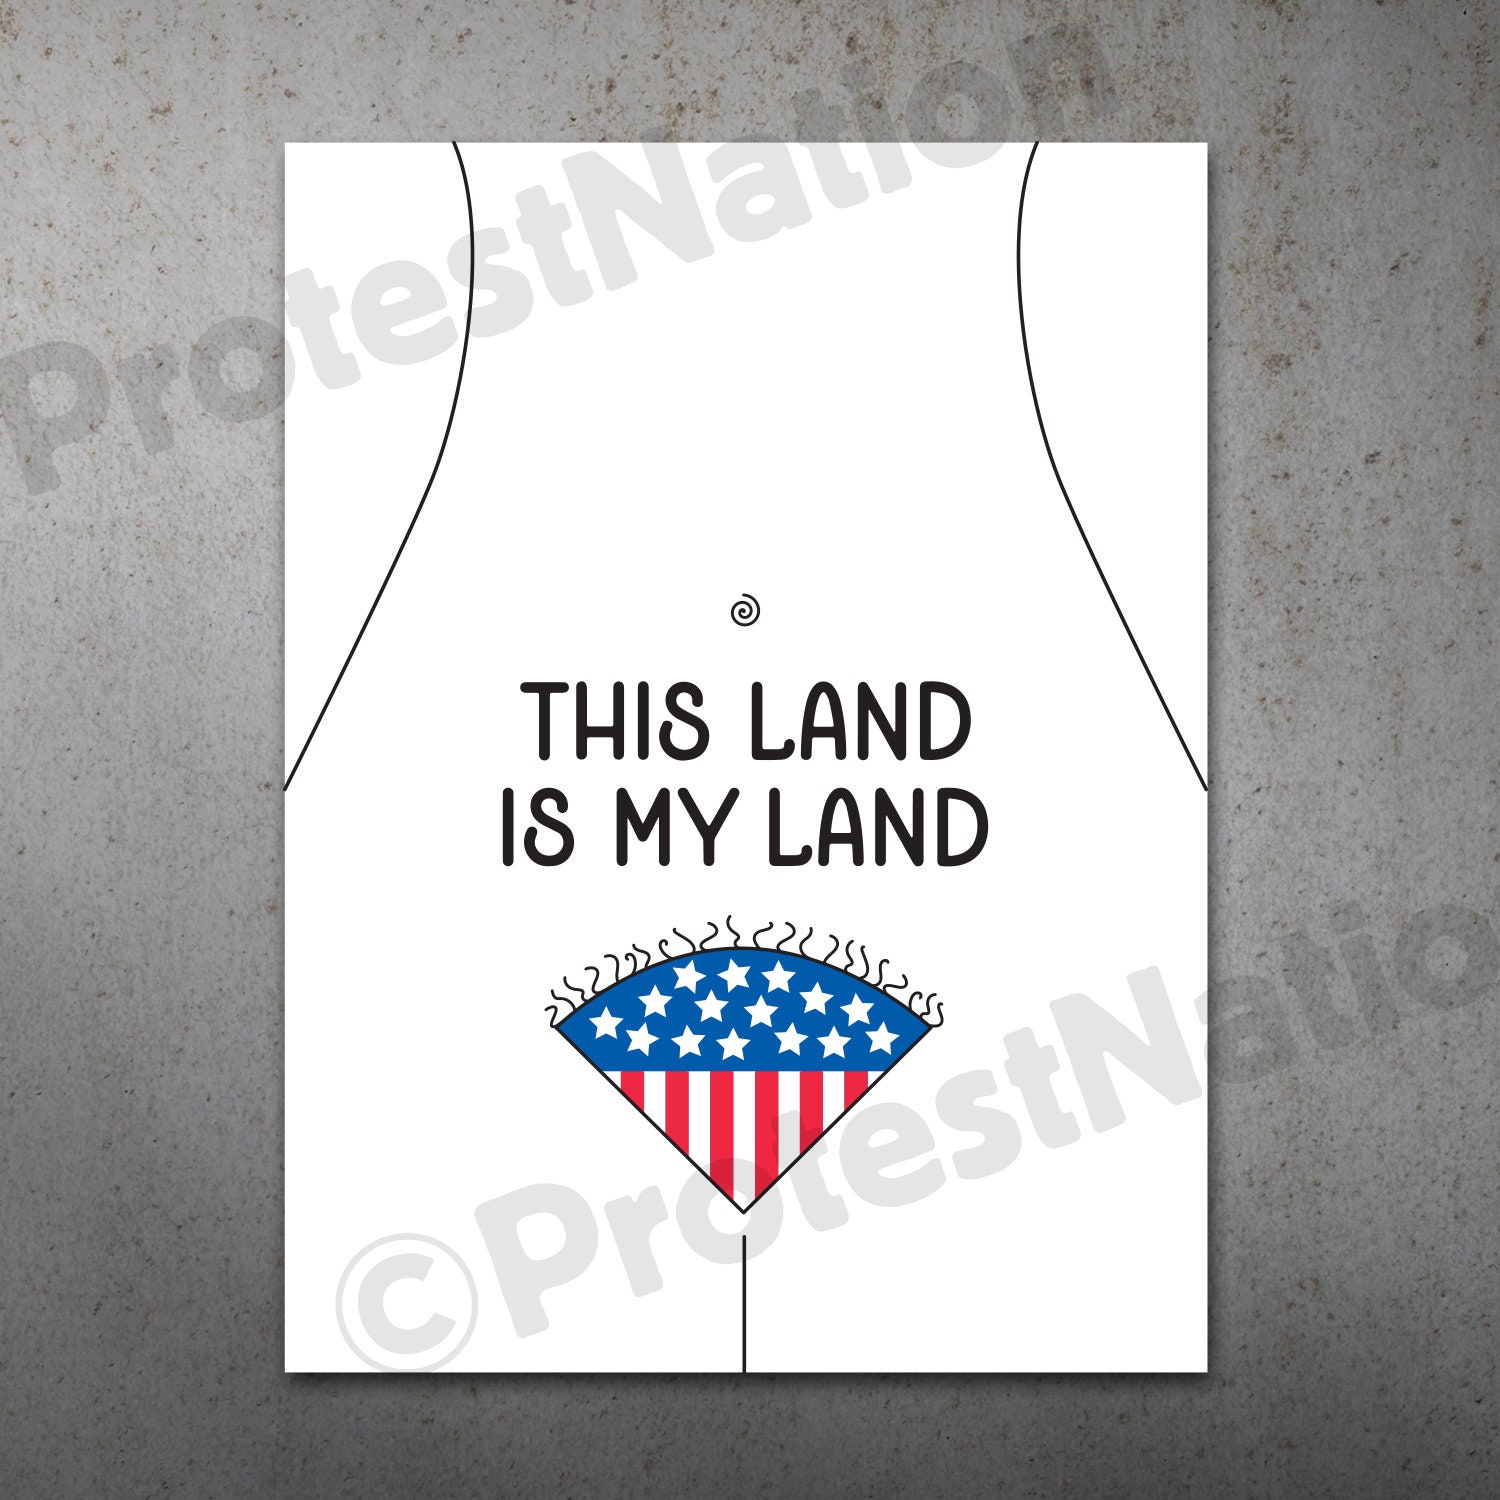 This Land is My Land PRINTABLE Protest Poster  Protest Sign